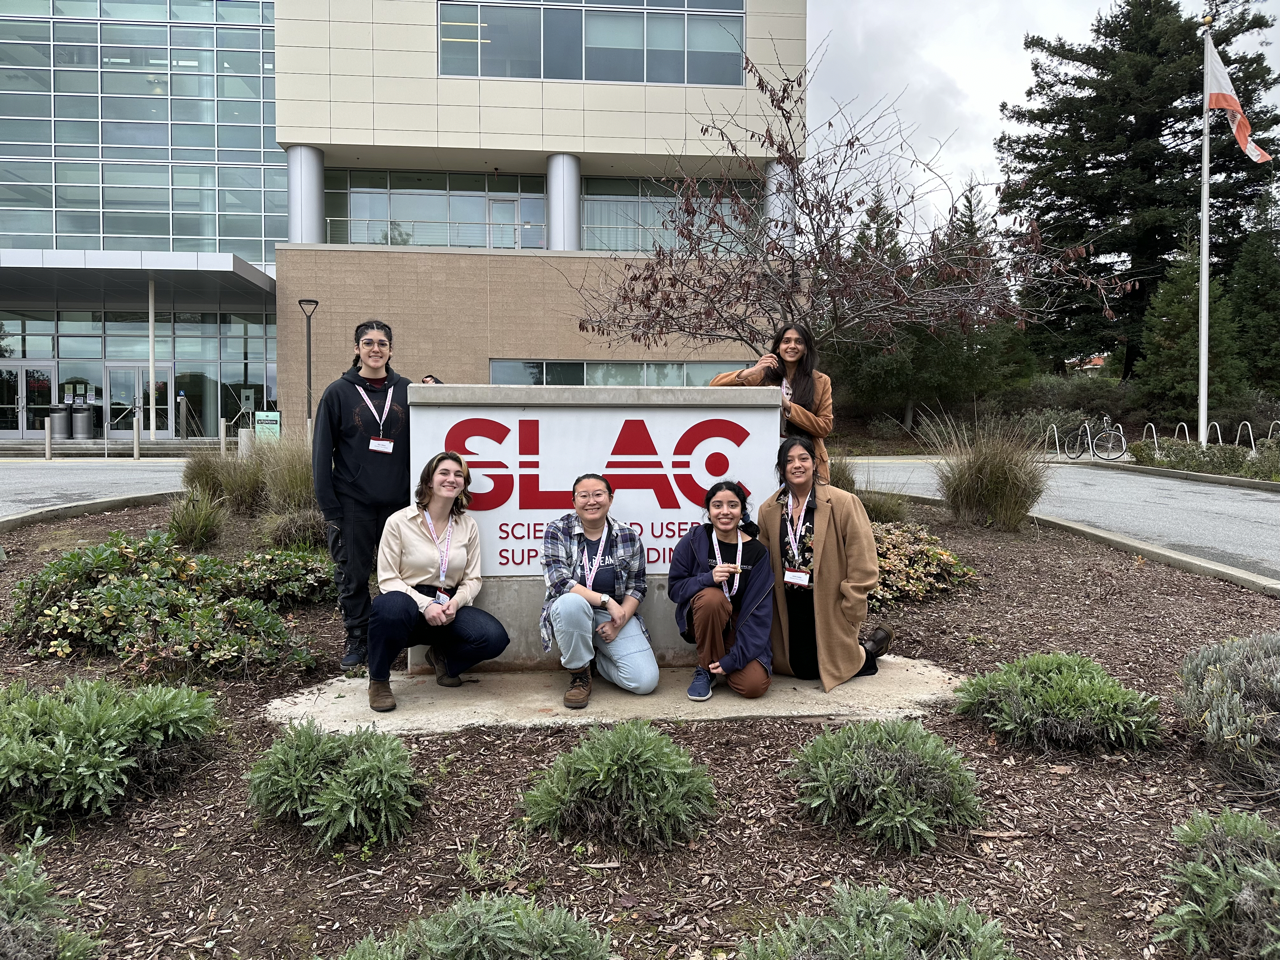 Physics students standing in front of Stanford's SLAC facility sign.